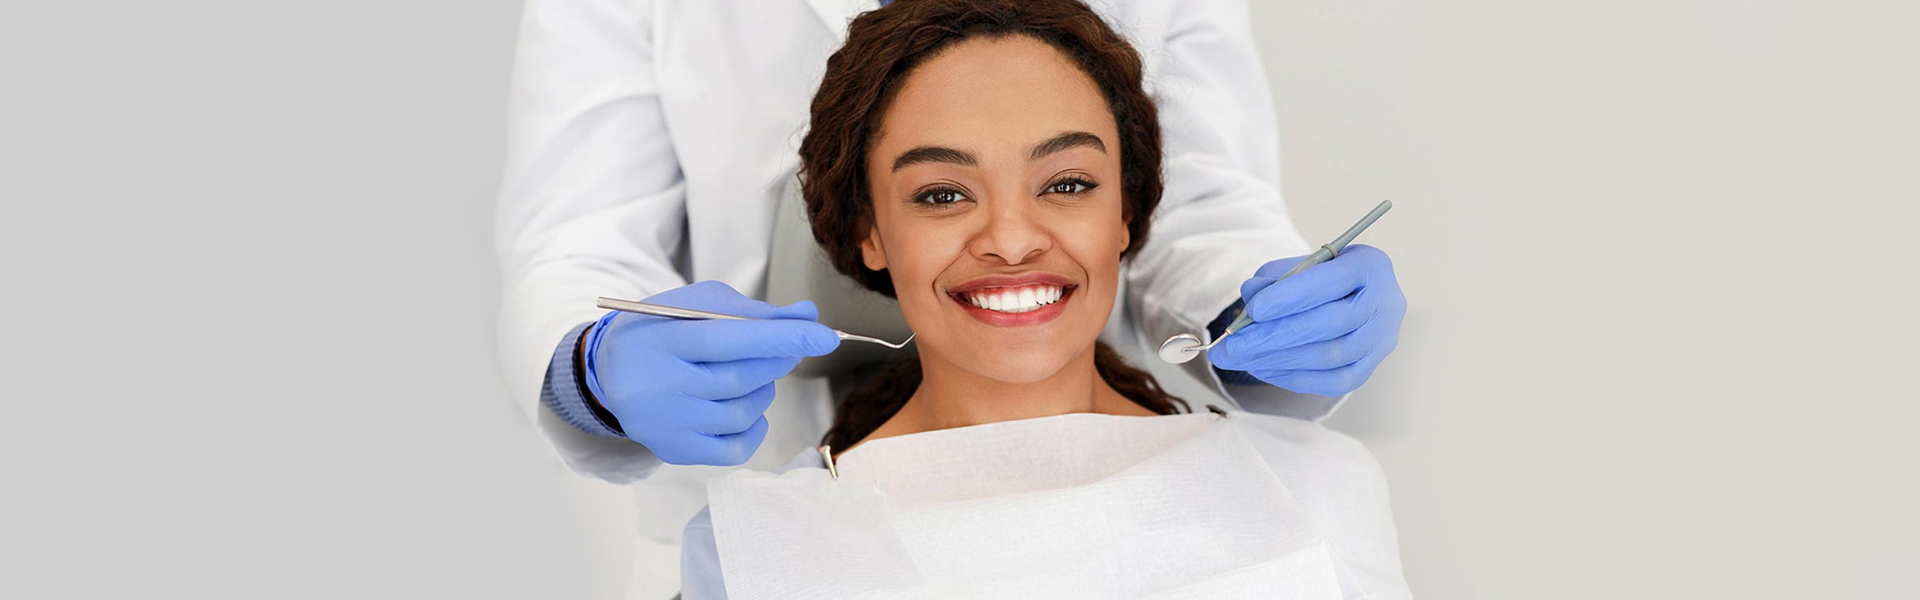 Periodontal Treatment – Three Possible Ways to Save Your Teeth